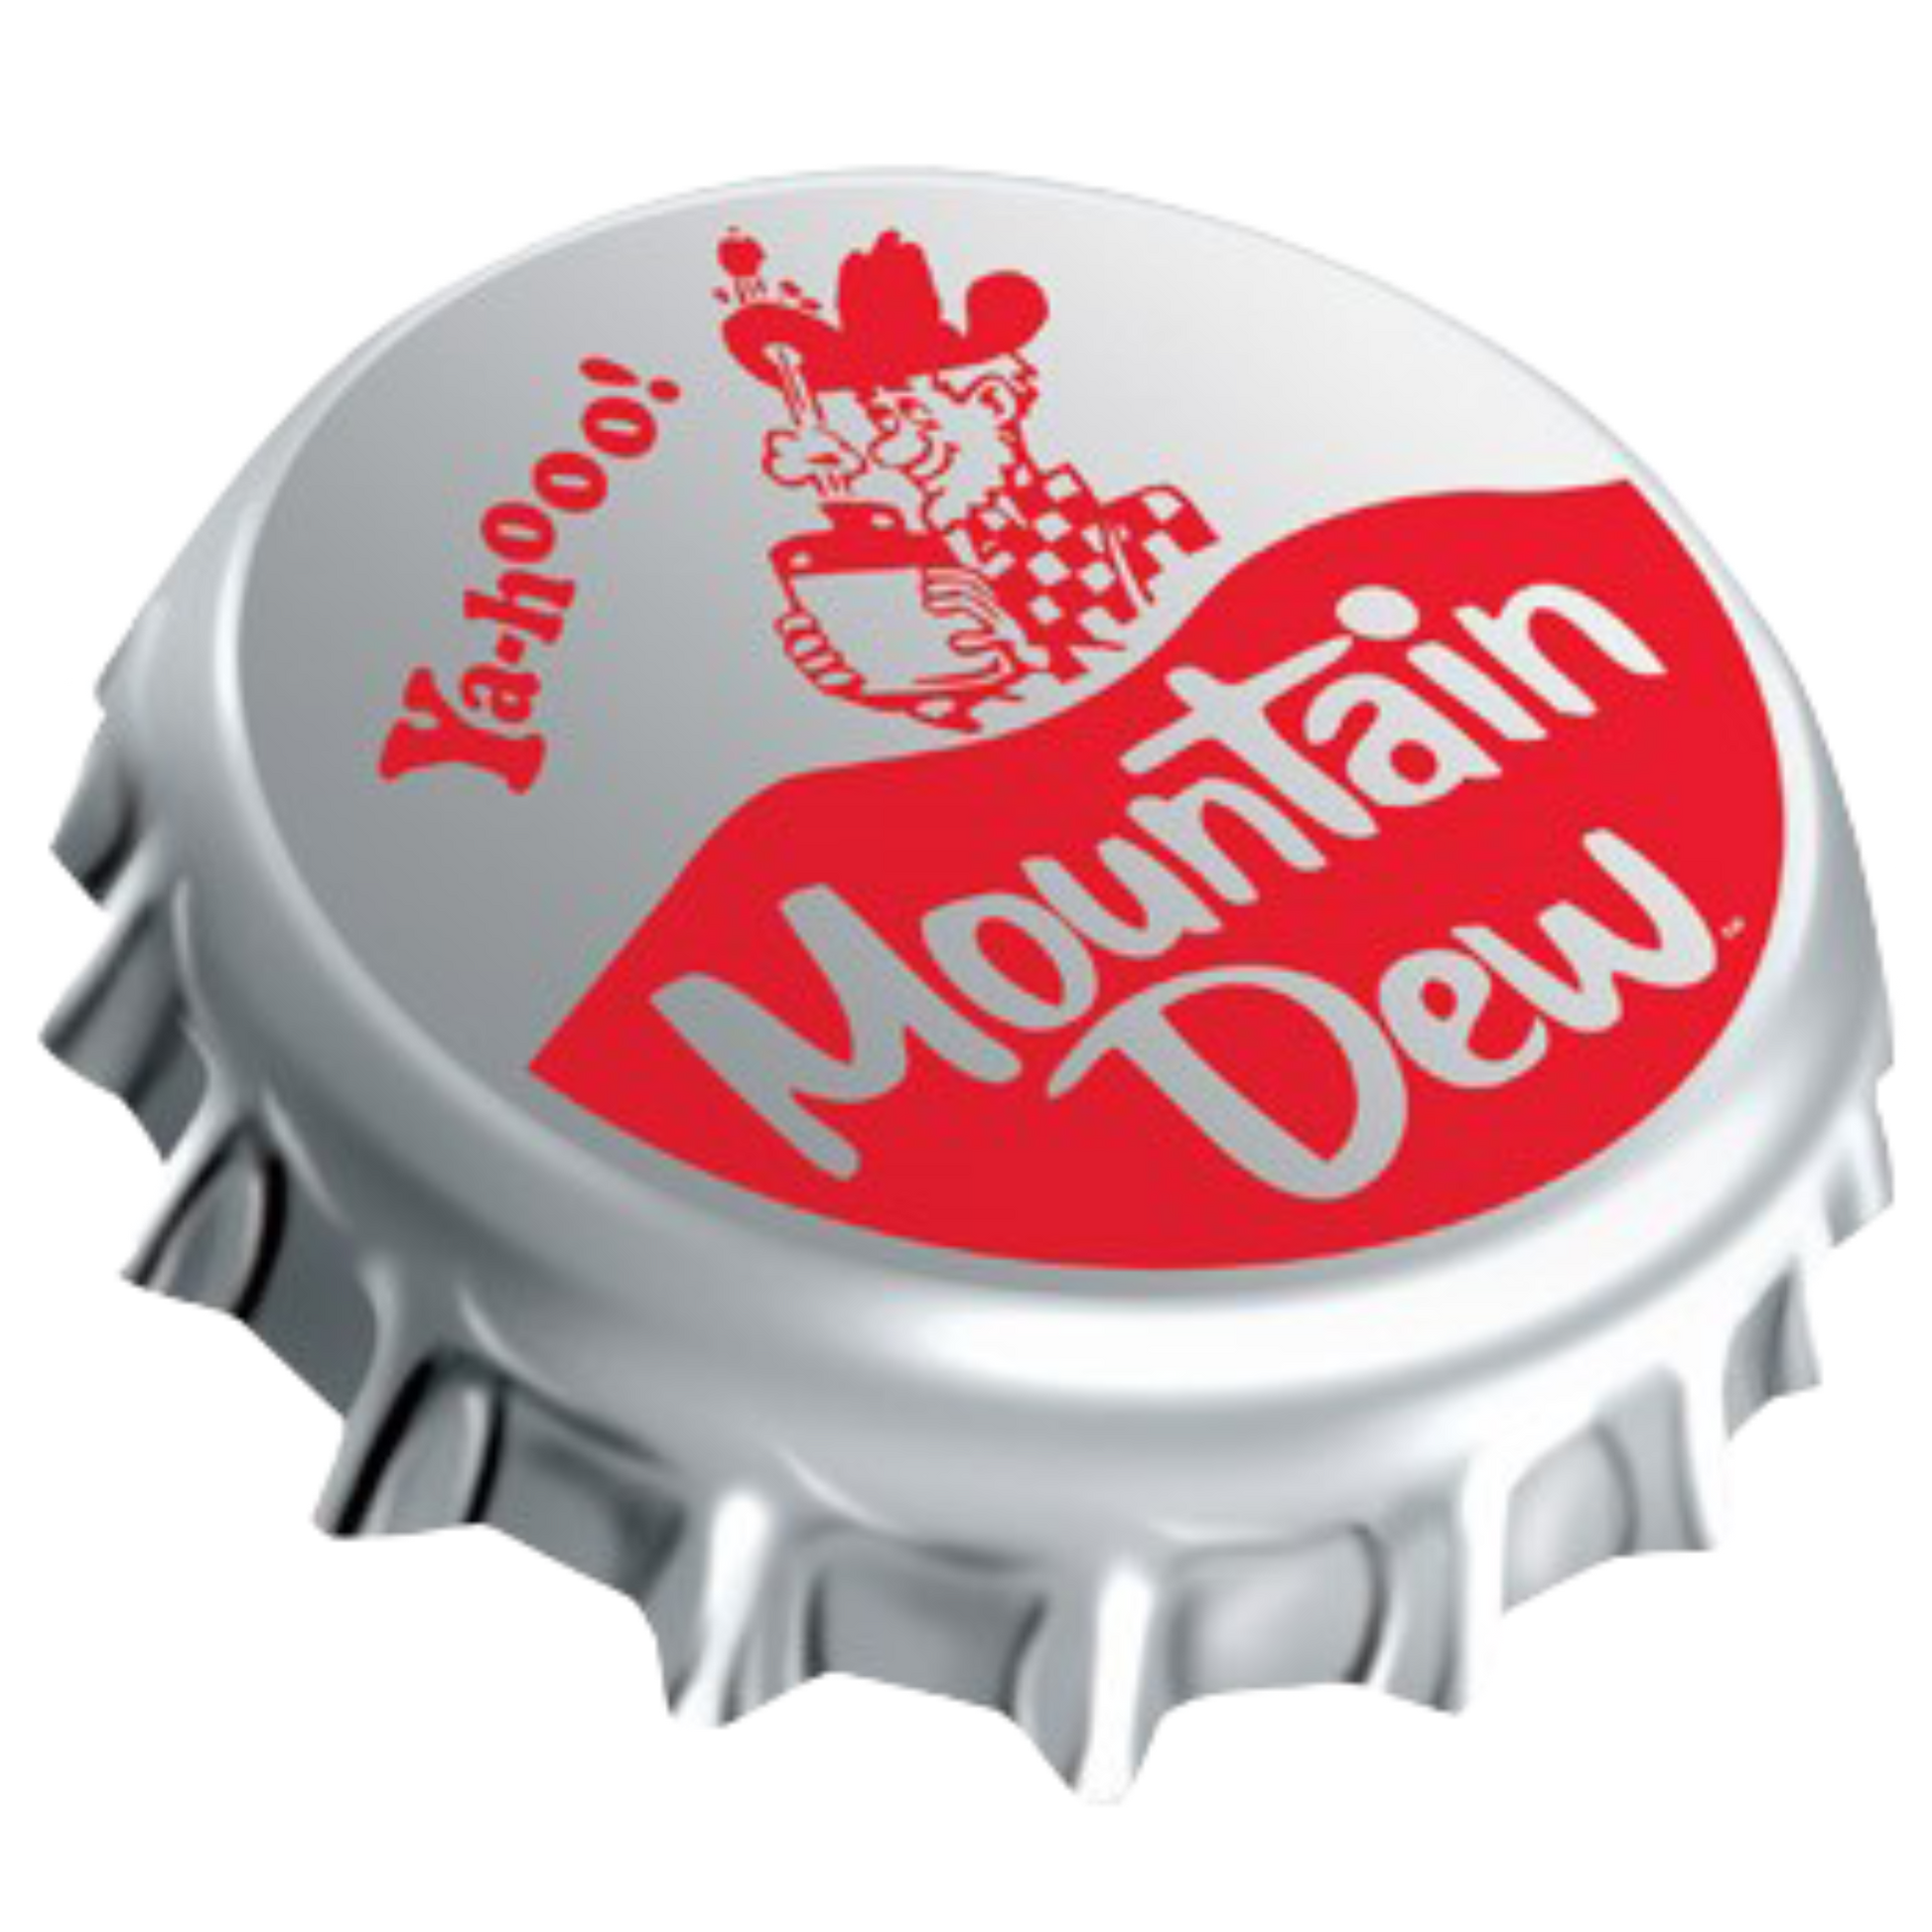 Silver bottle cap with the red Mountain Dew logo and vintage "Yahoo!" hillbilly graphic.